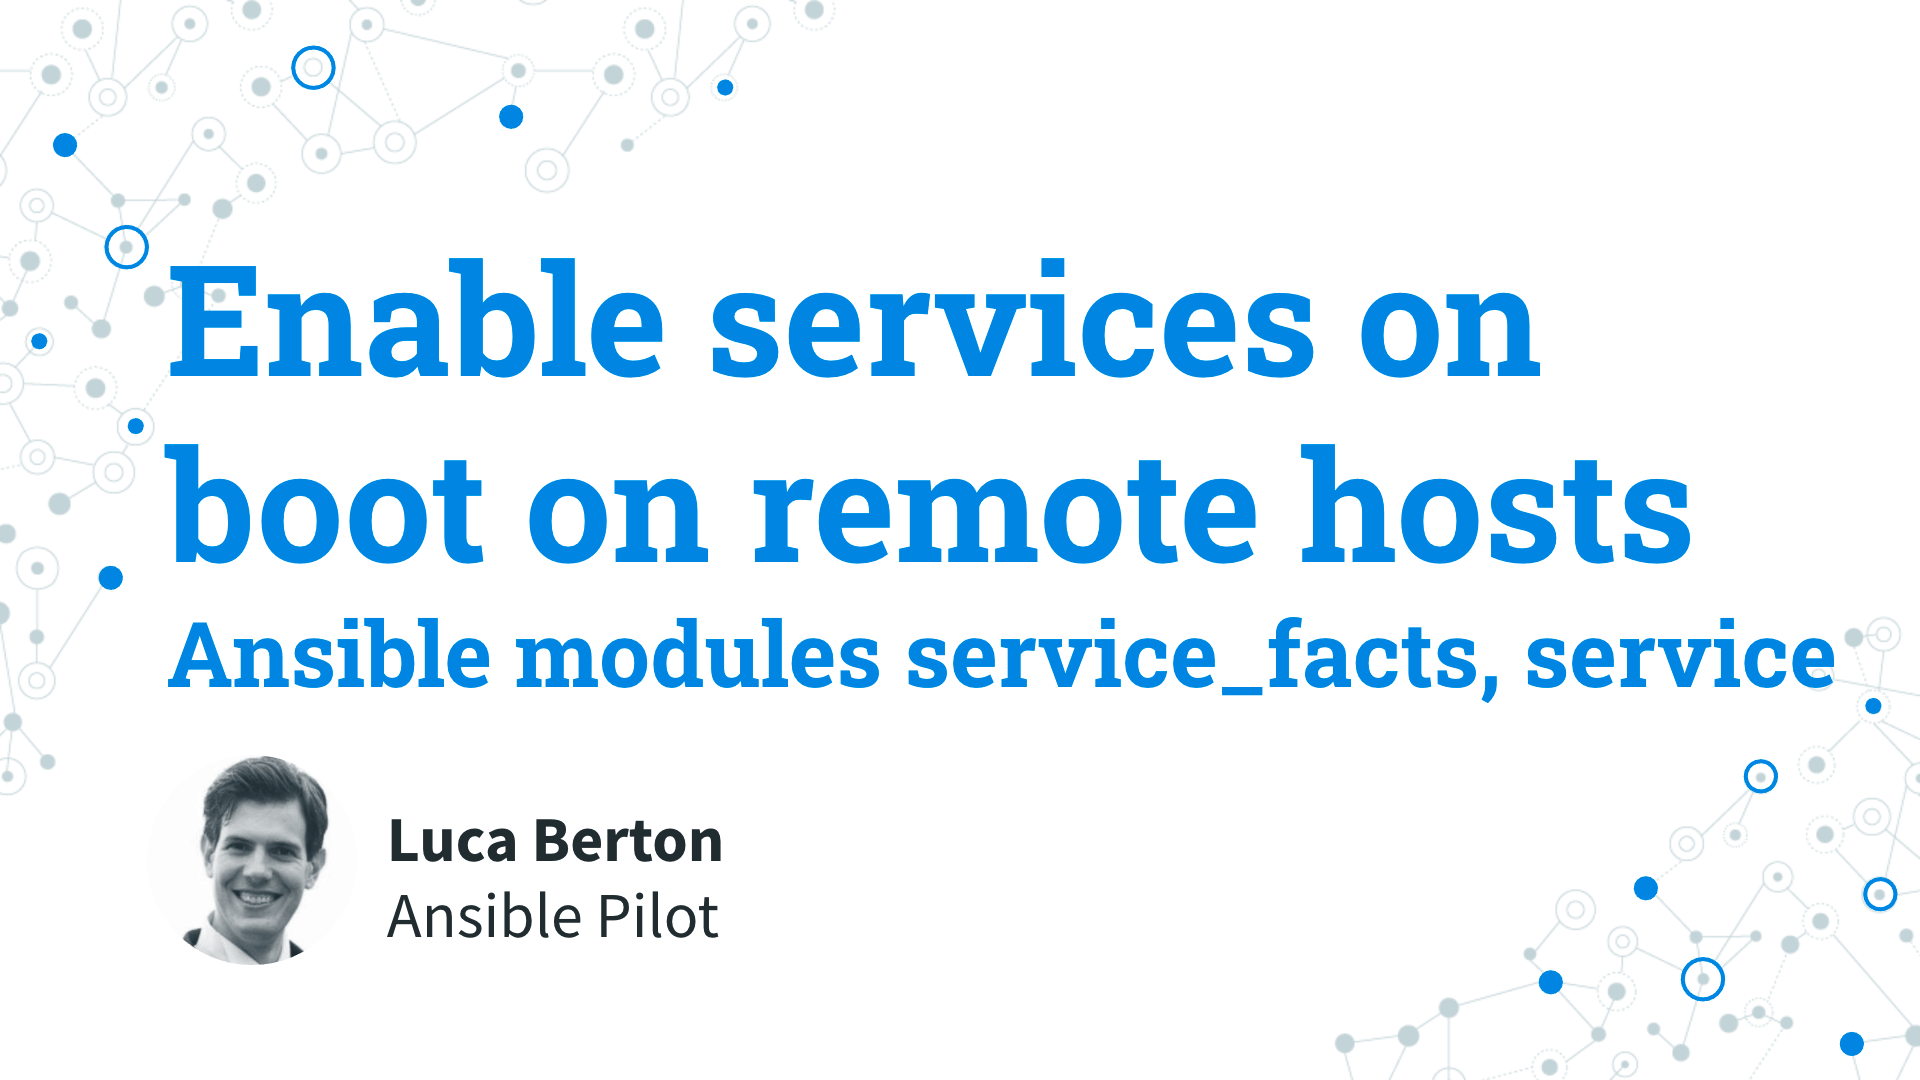 Start and enable services on boot on Linux remote hosts - Ansible module service_facts, service